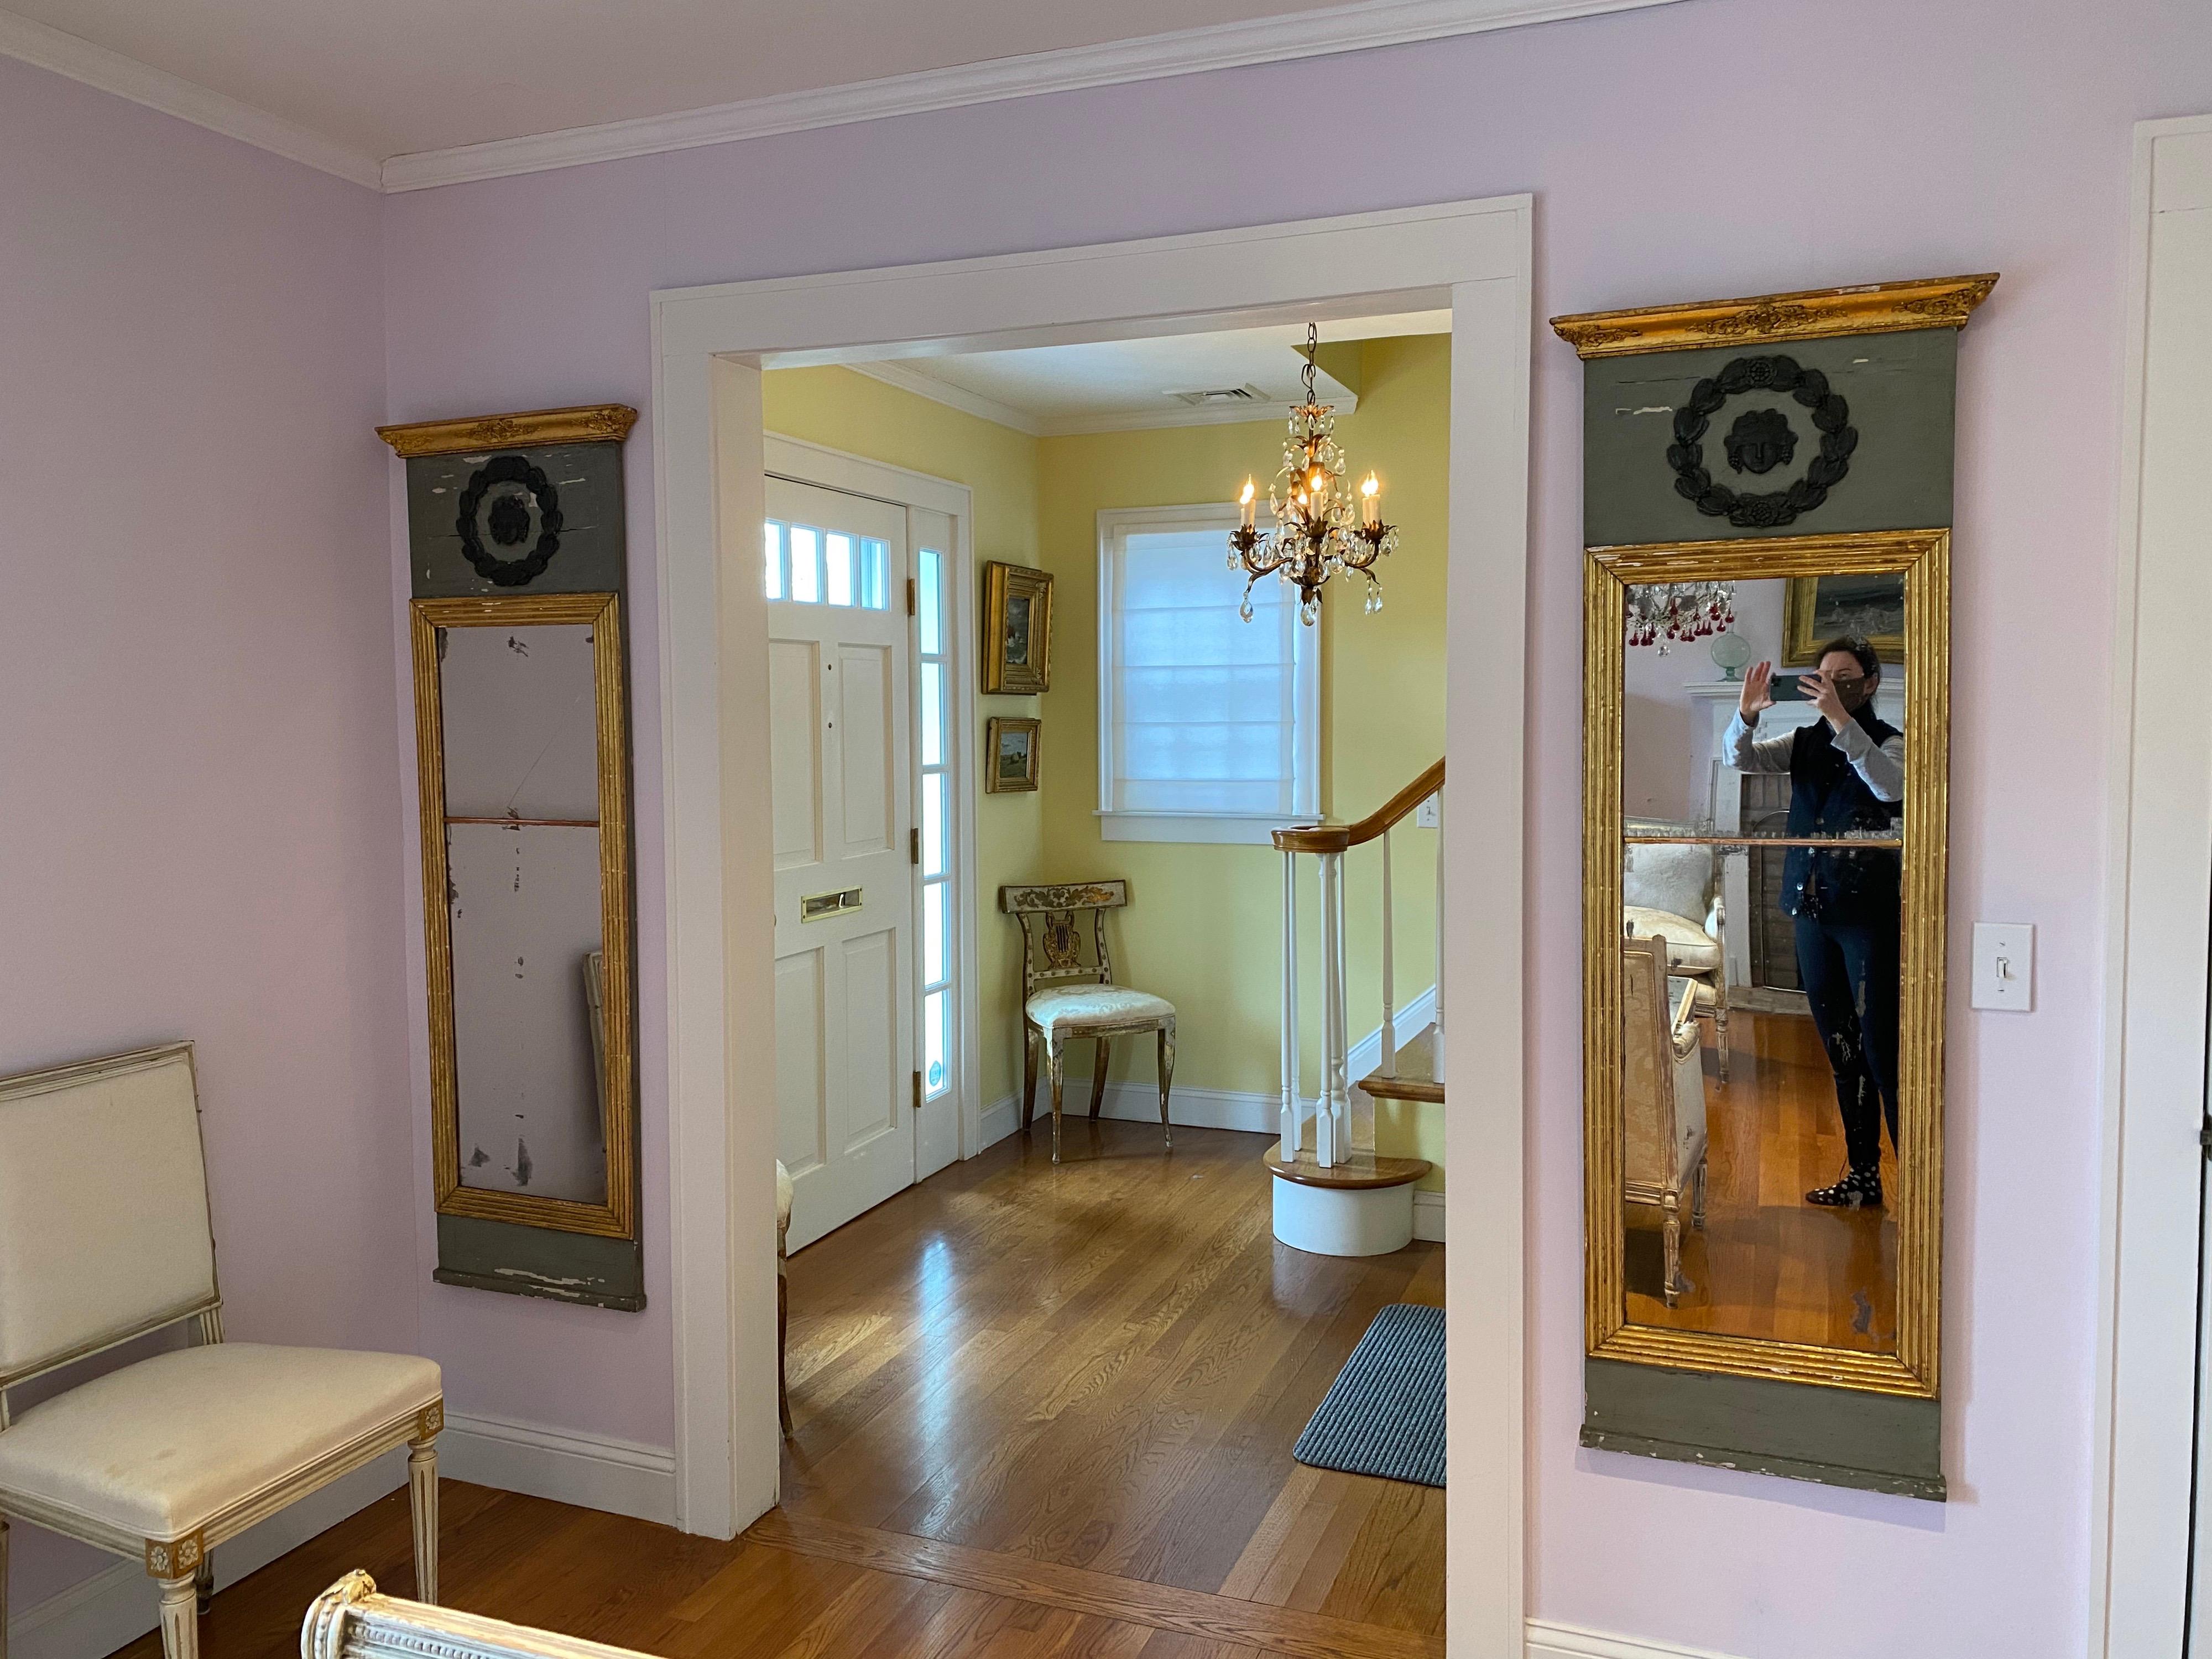 Pair of Early 19th Century Swedish Neoclassical painted pier mirrors.
Stunning long, narrow pair of mirrors in a attractive tone on tone green painted finish and gilded on the crown and frame of mirrors. Center medallion of the head of Bacchus